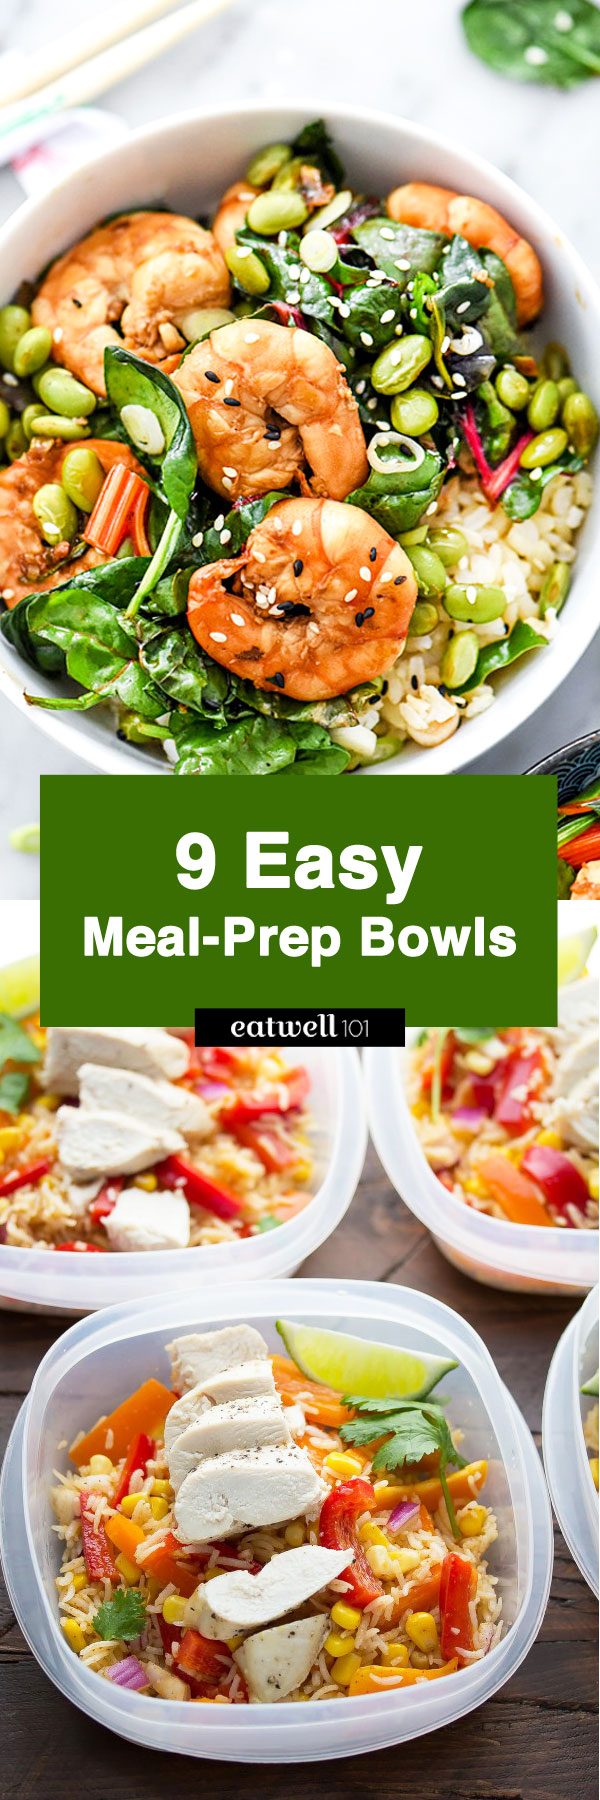 8 Healthy Meal Prep Bowls in 1 Hour - Green Healthy Cooking